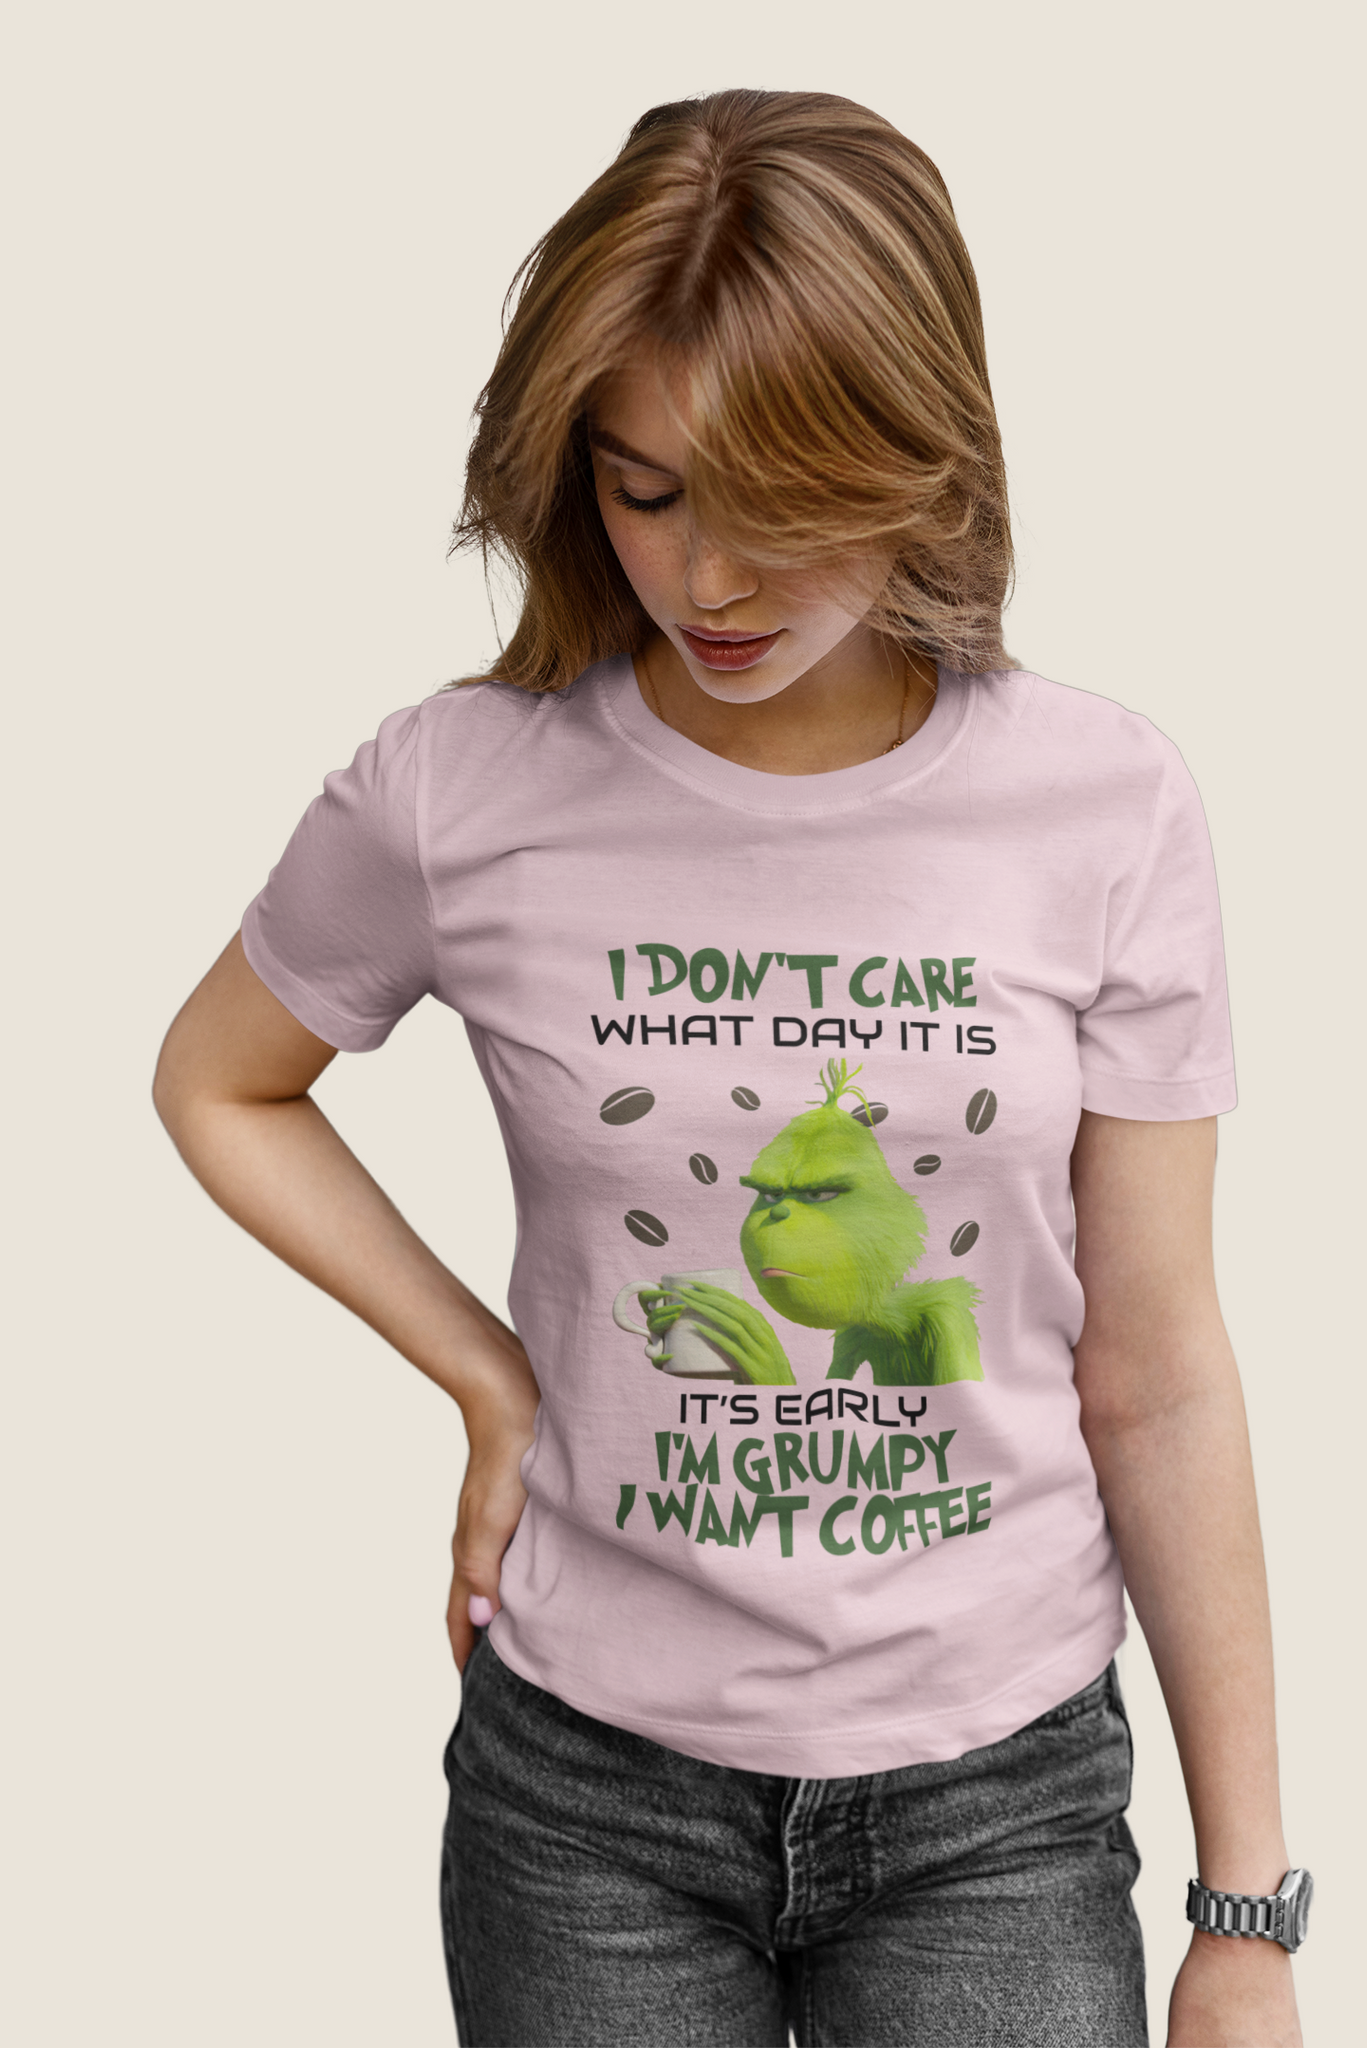 Grinch T Shirt, I Dont Care What Day It Is Tshirt, Its Early Im Grumpy I Want Coffee T Shirt, Christmas Gifts